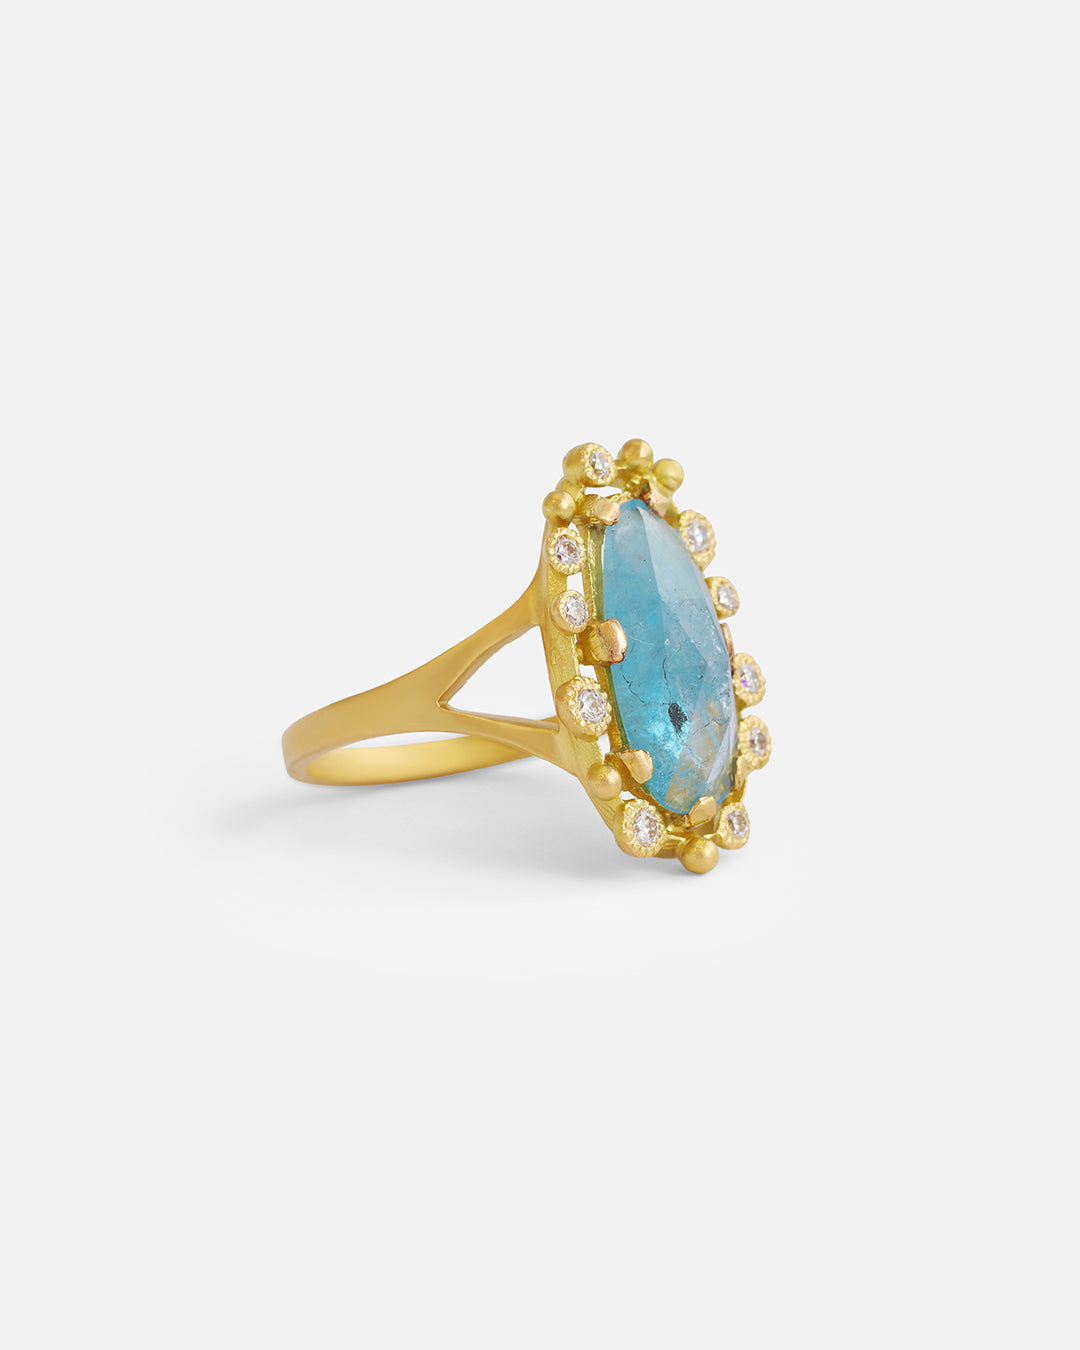 Melee Halo / Aquamarine Ring By Hiroyo in rings Category